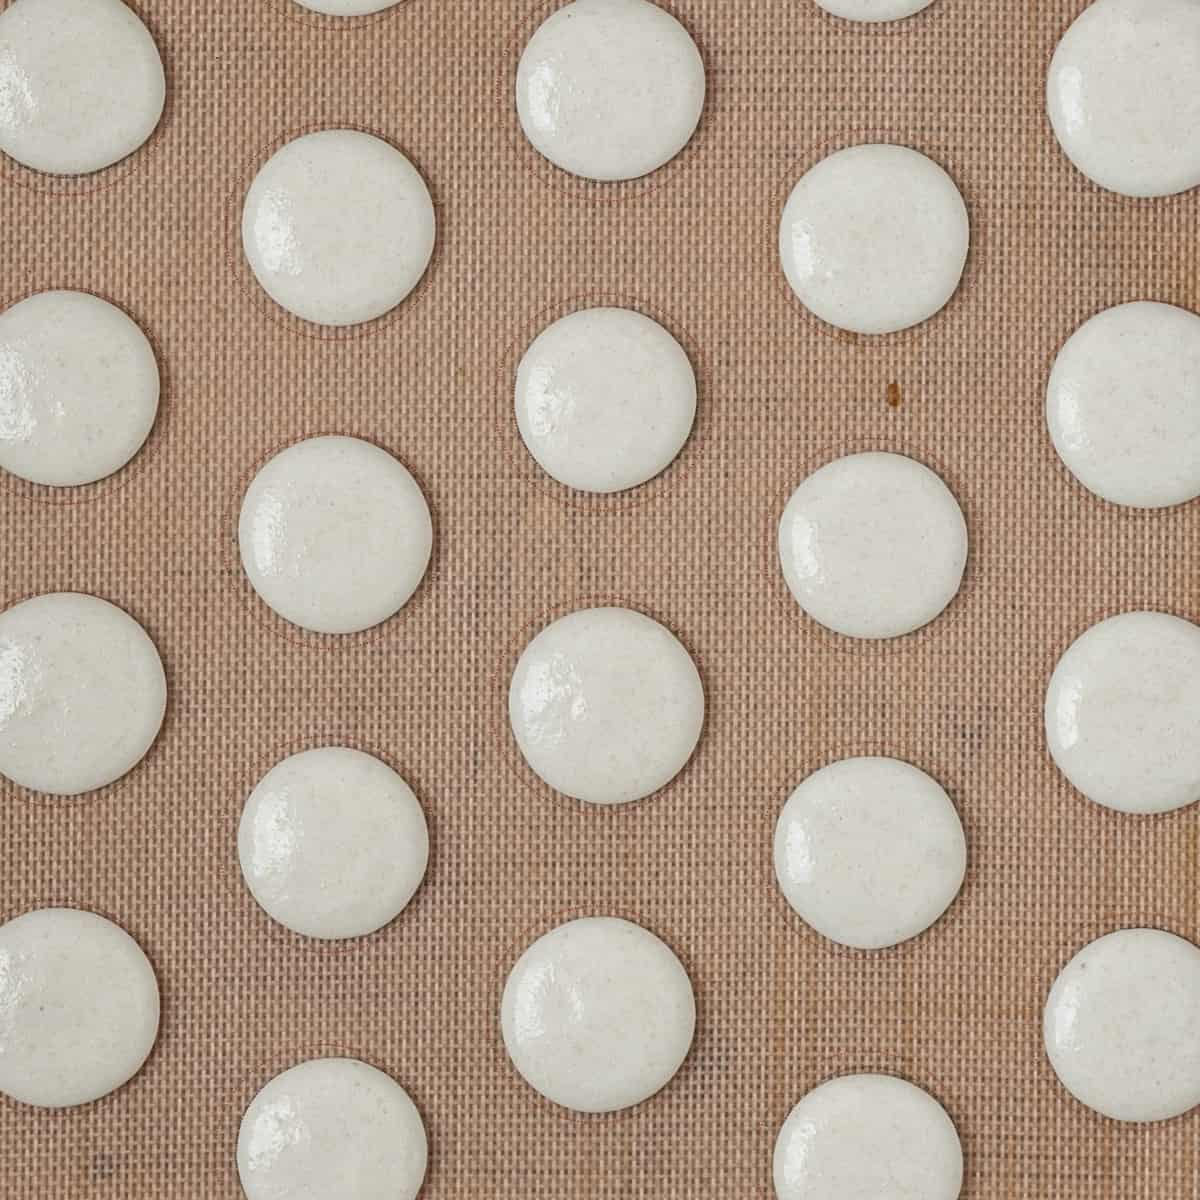 the macarons piped onto a silicone mat before baking.